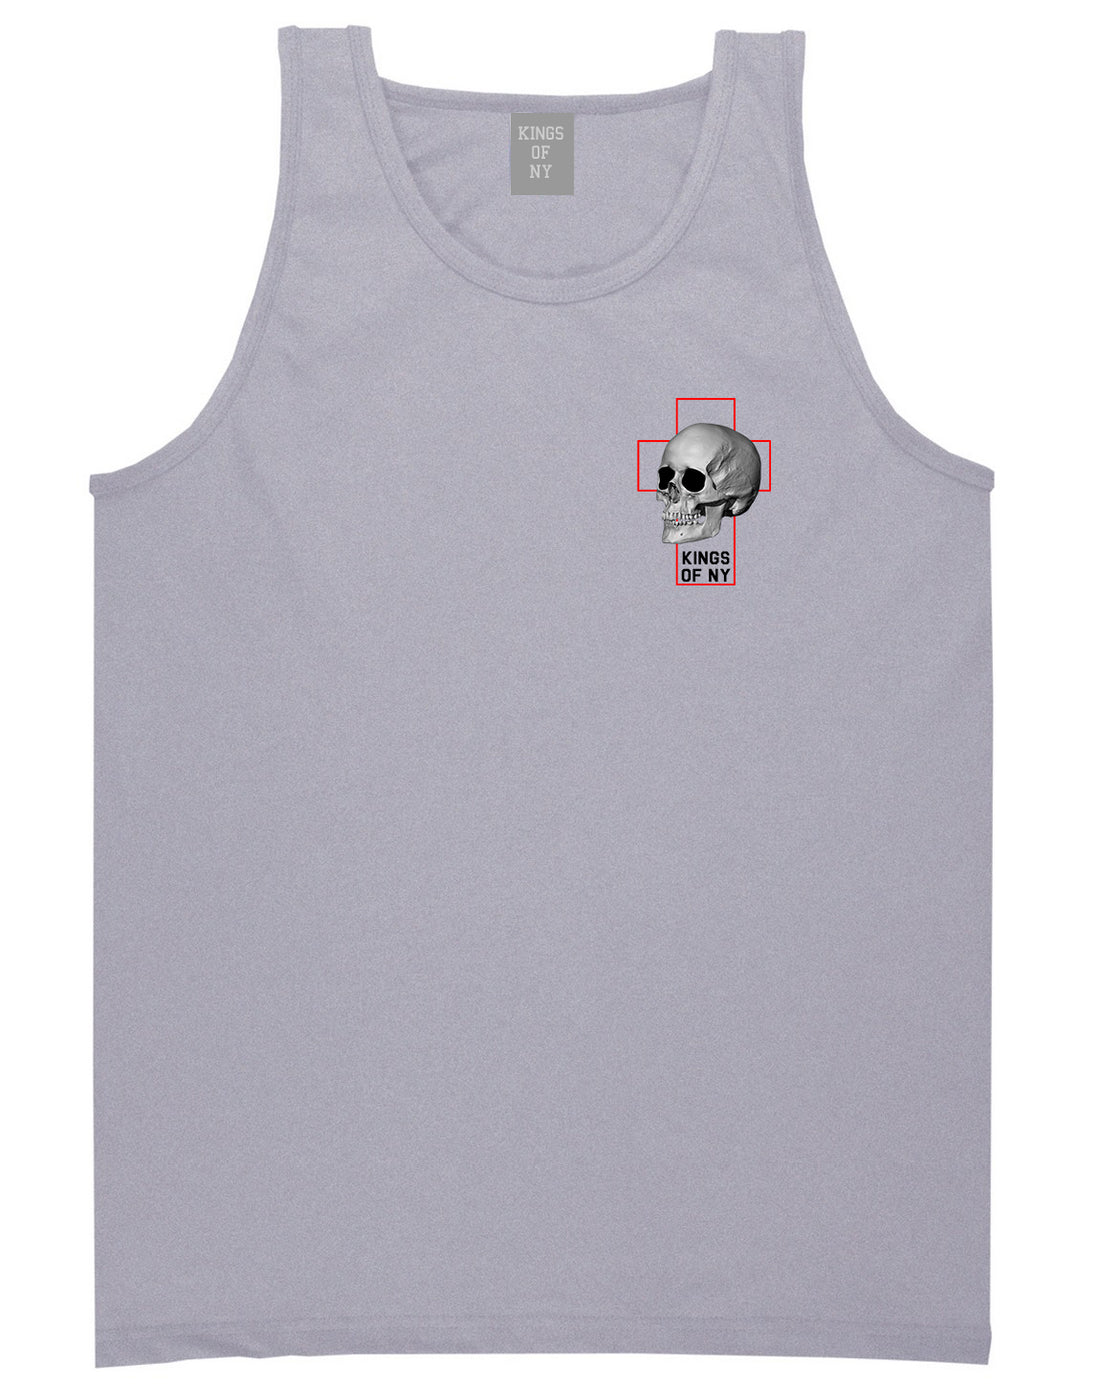 Cross And Skull Chest Mens Tank Top Shirt Grey by Kings Of NY